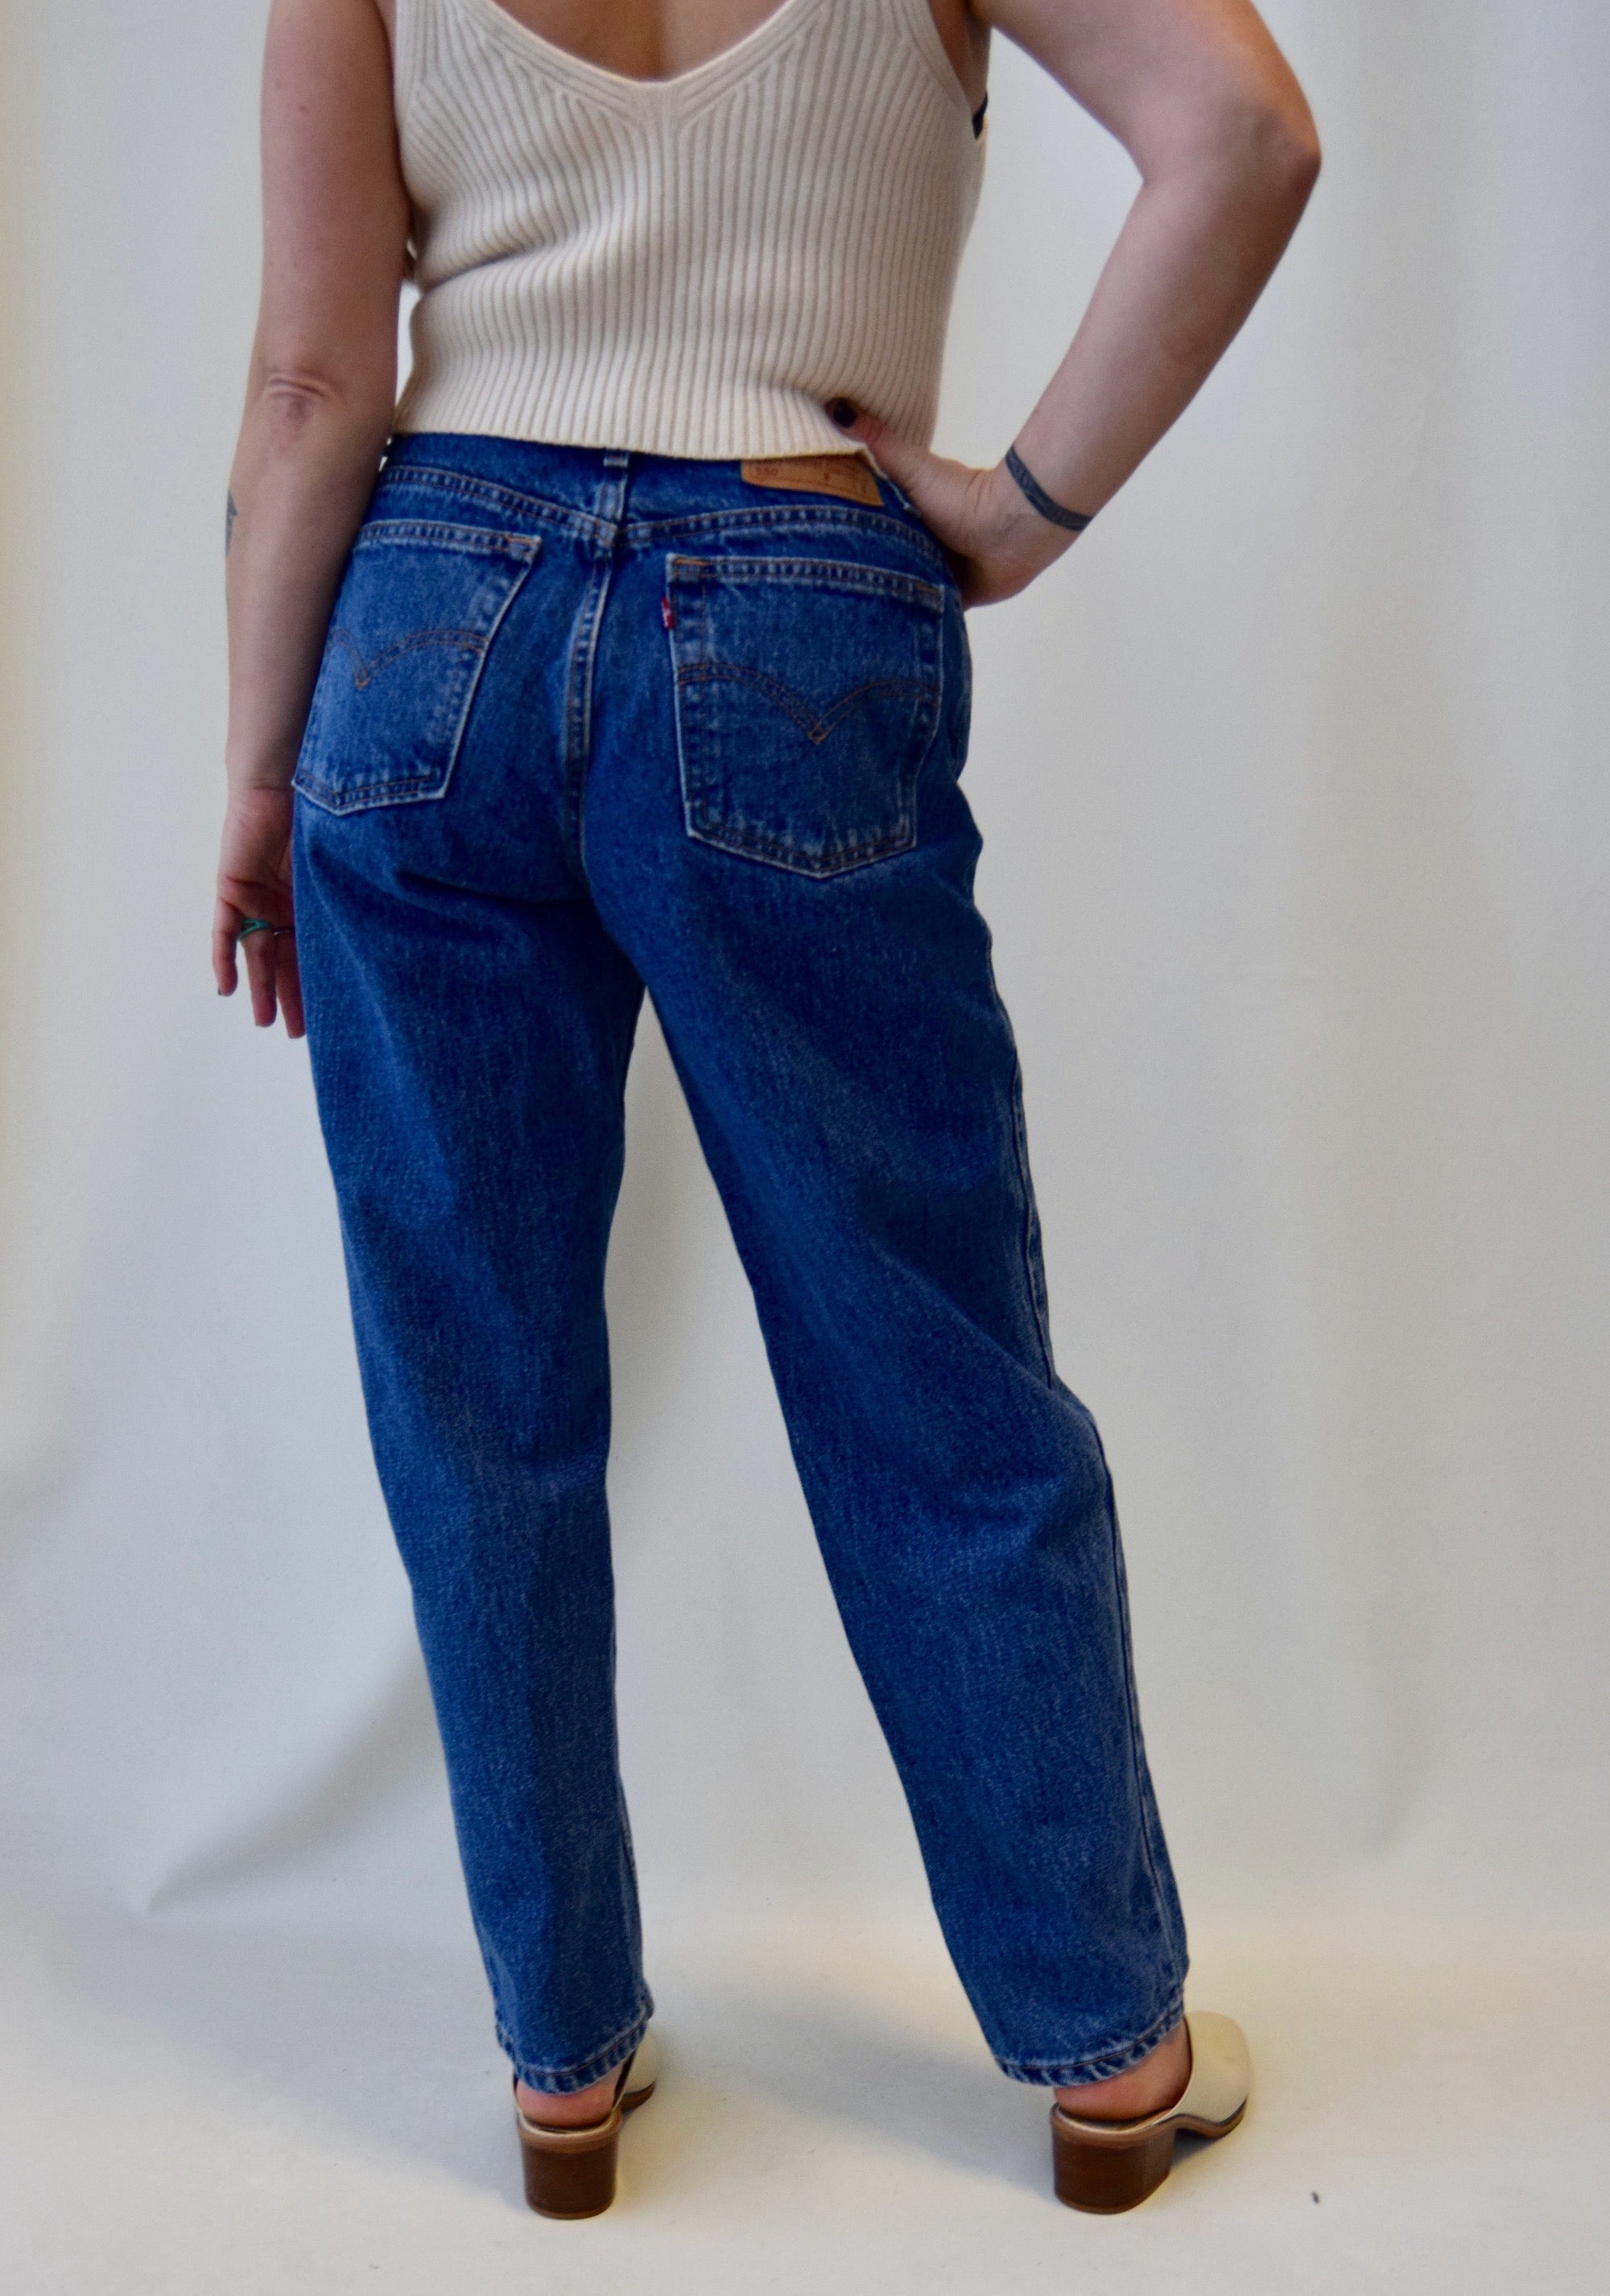 Levi's Relaxed Tapered Leg Jeans